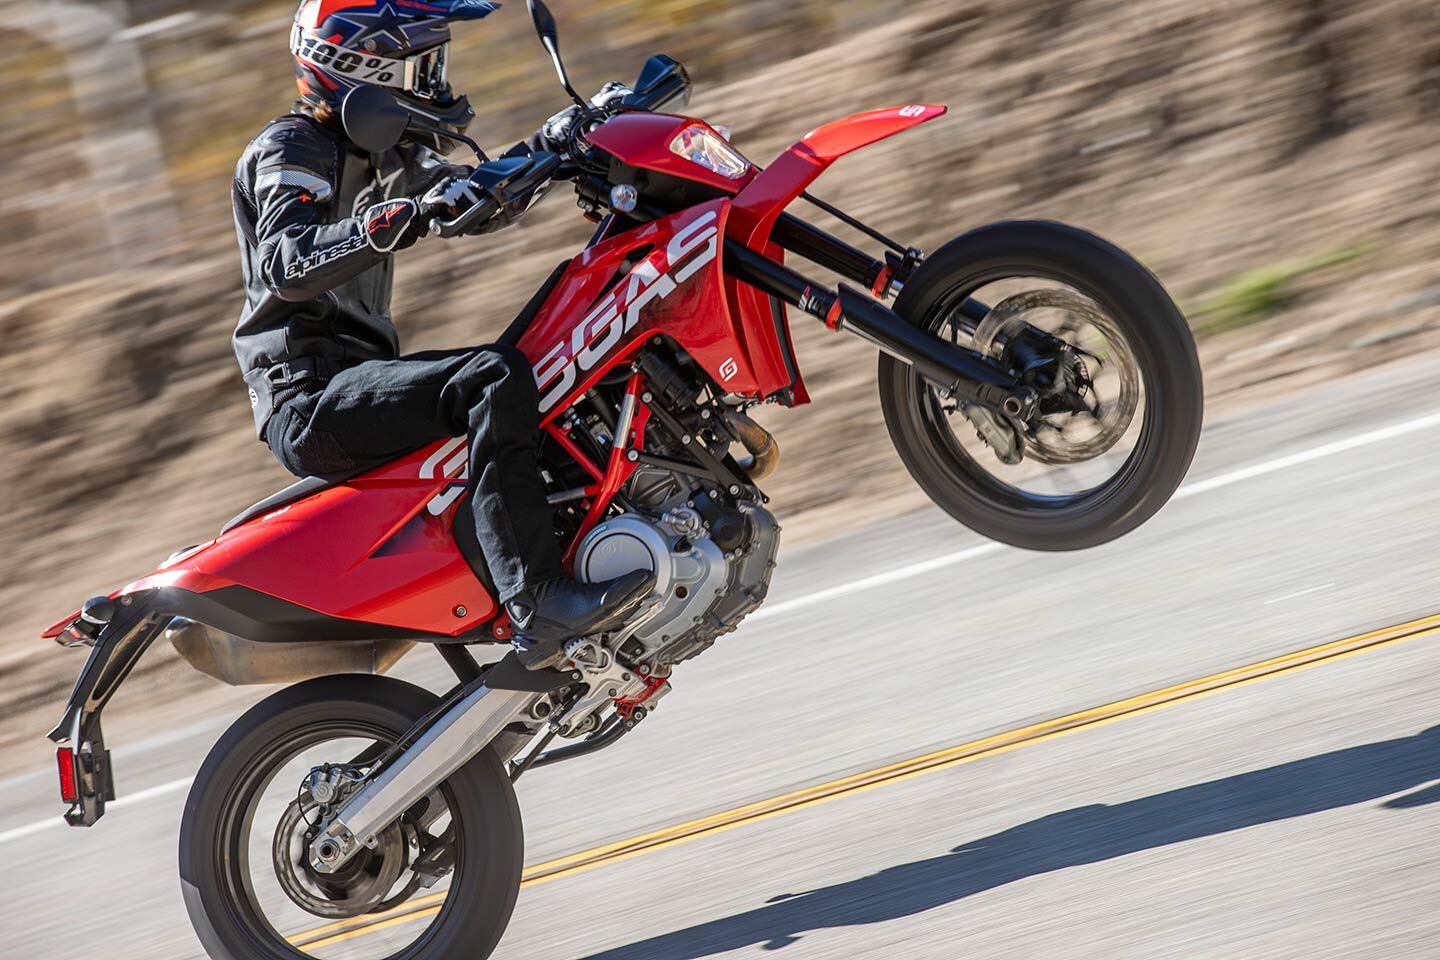 The SM 700 is the only supermoto in the GasGas product lineup.